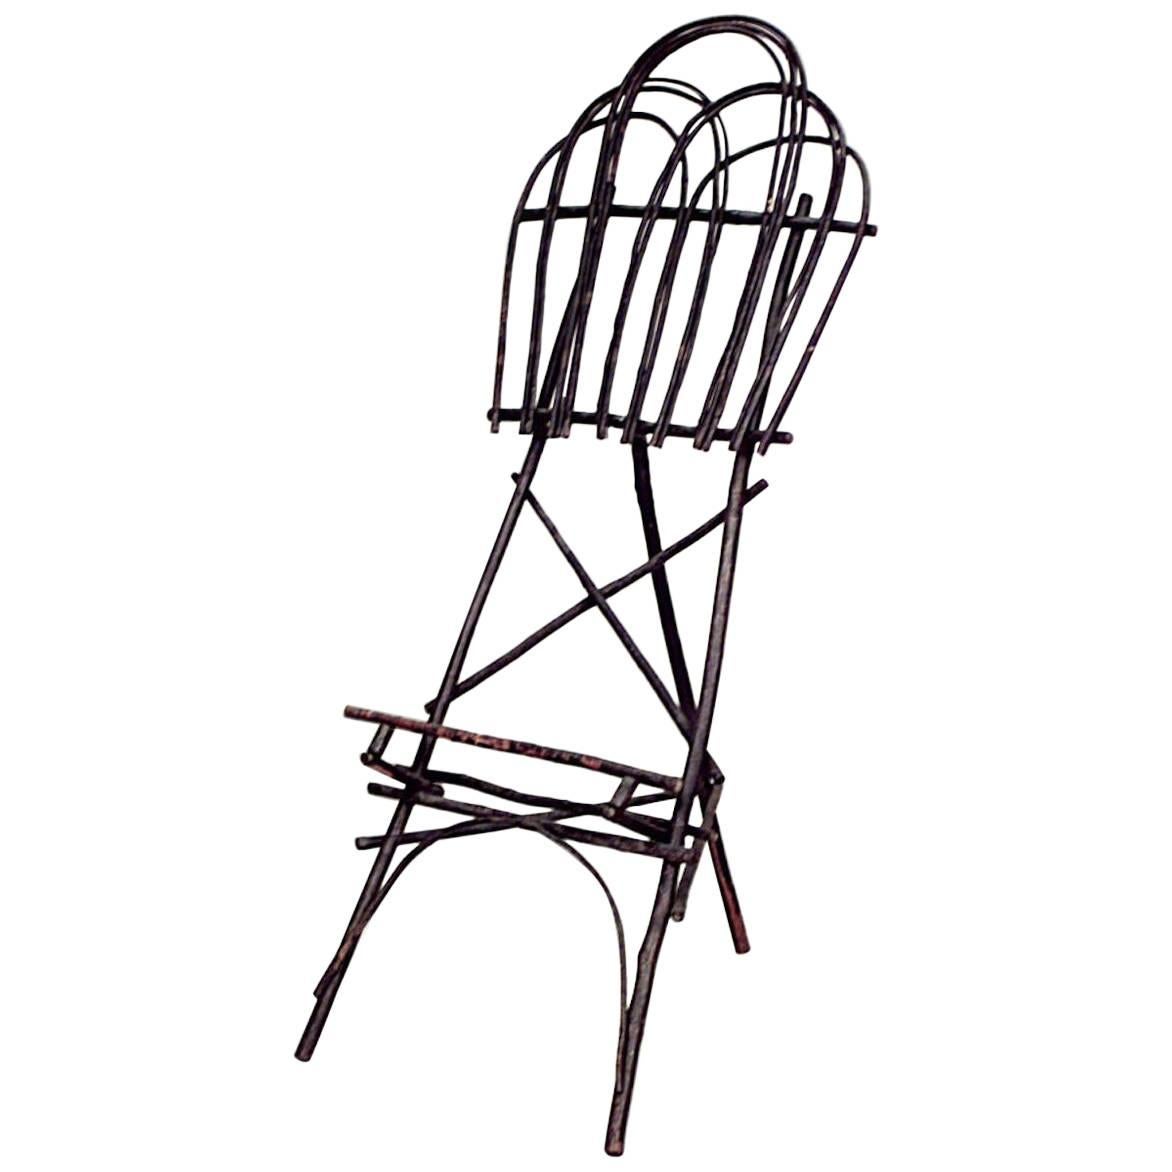 Rustic Adirondack Style Twig Hoop Shaped Easel Stand, 19th-20th Century